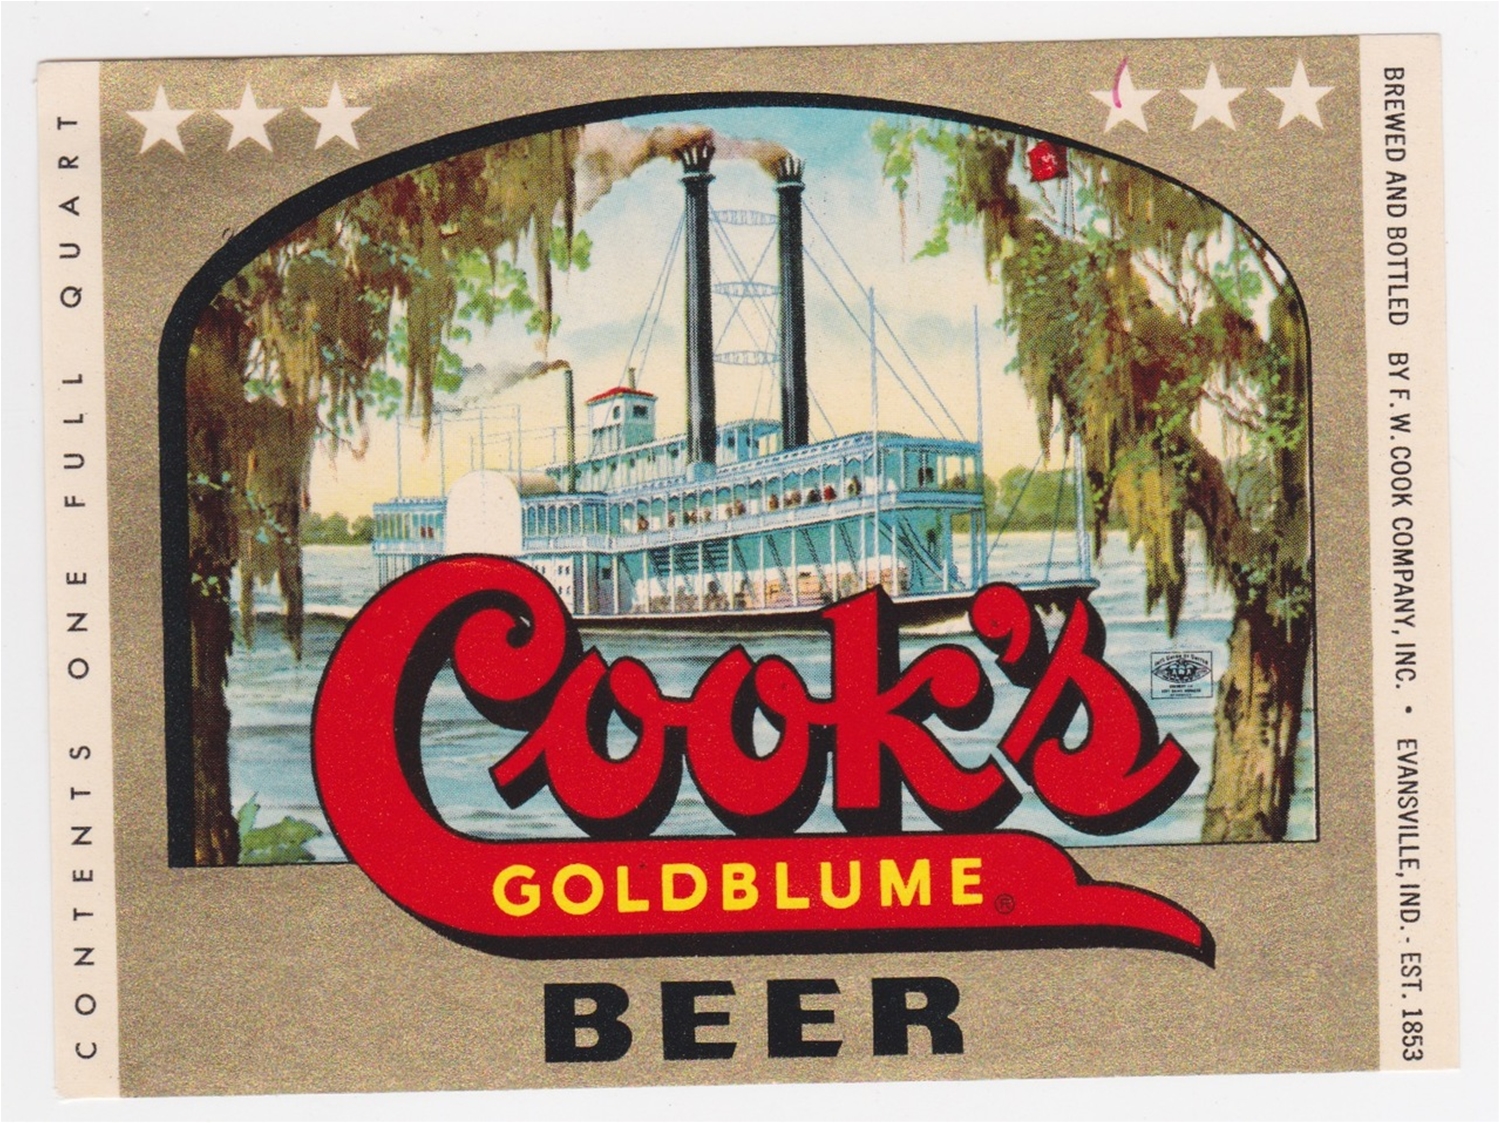 COOK'S GOLDBLUME SPECIAL BREWING BEER LABEL 9" x 12" SIGN 